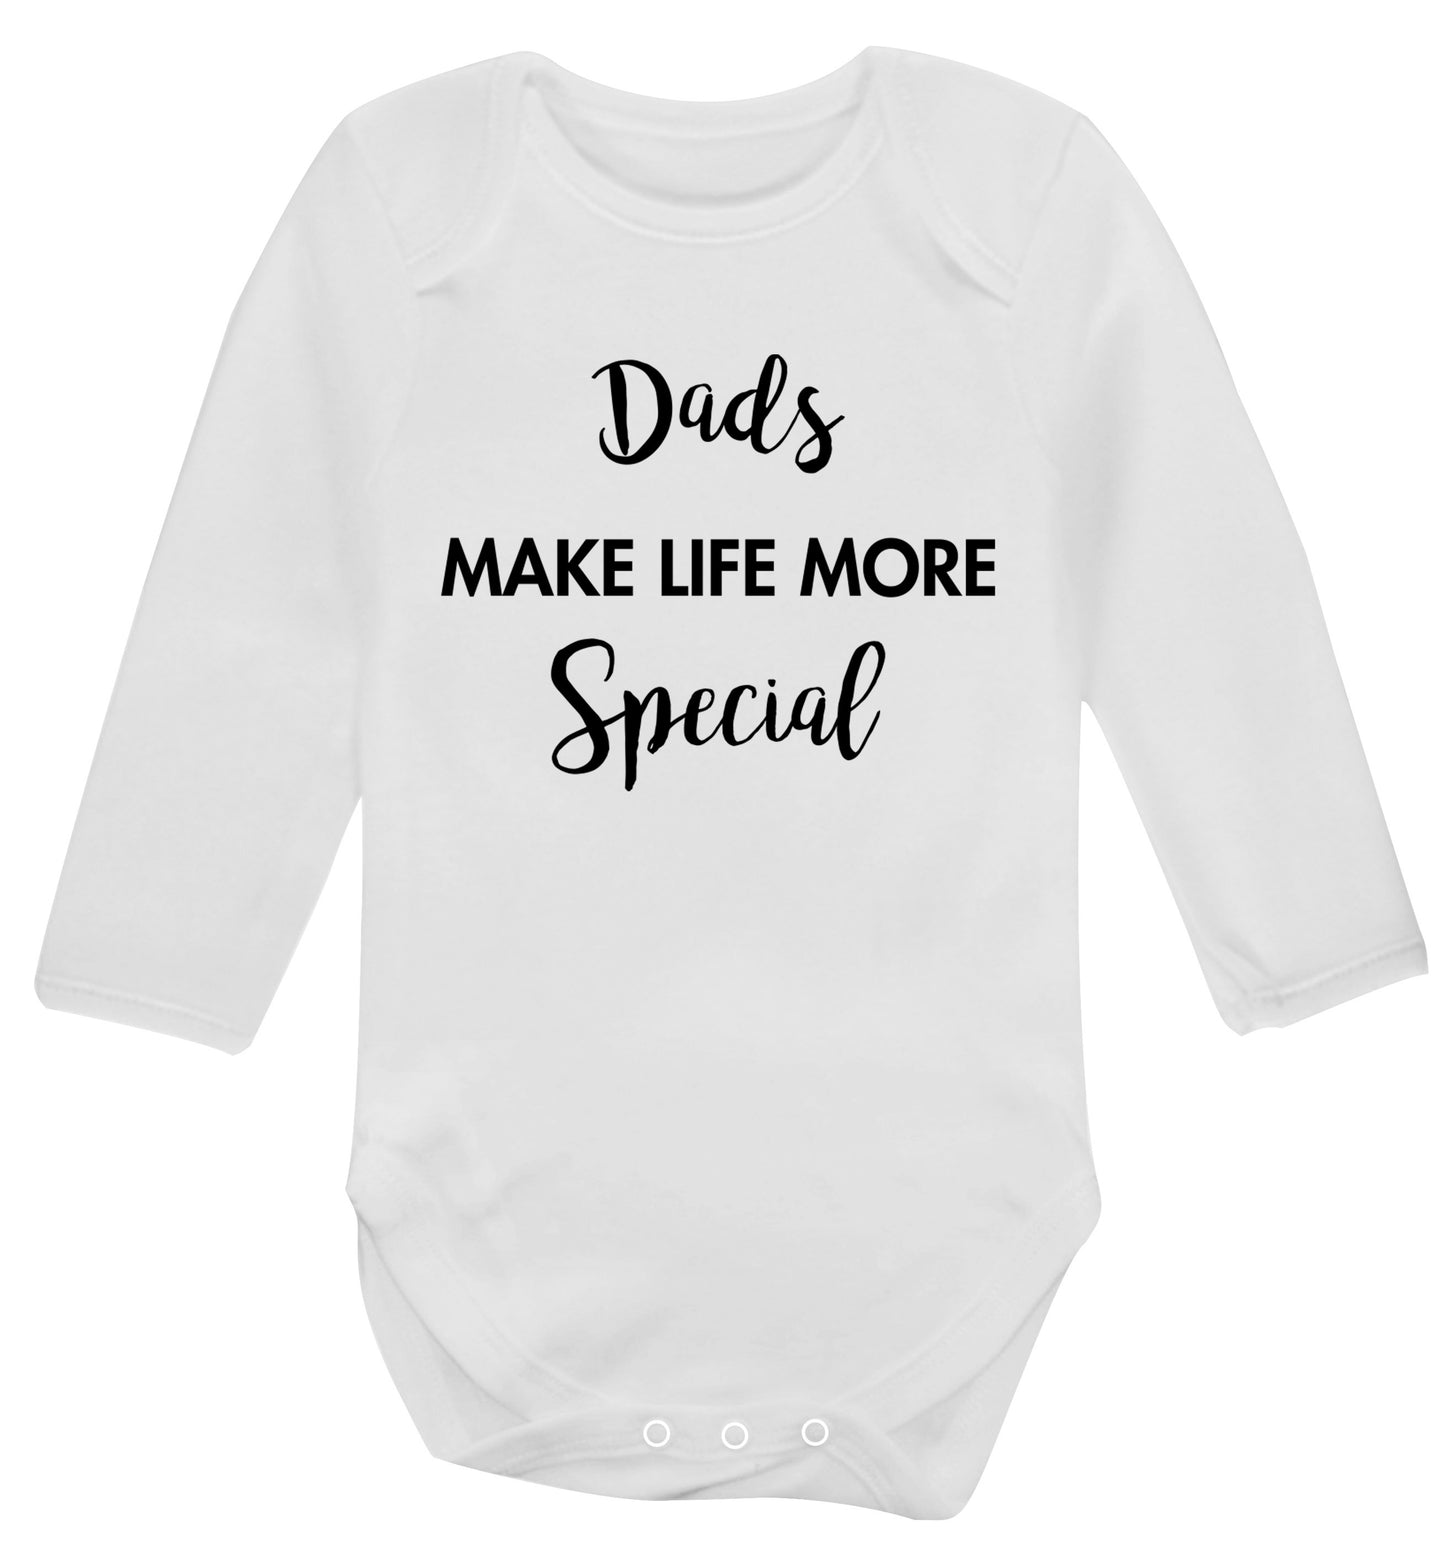 Dads make life more special Baby Vest long sleeved white 6-12 months